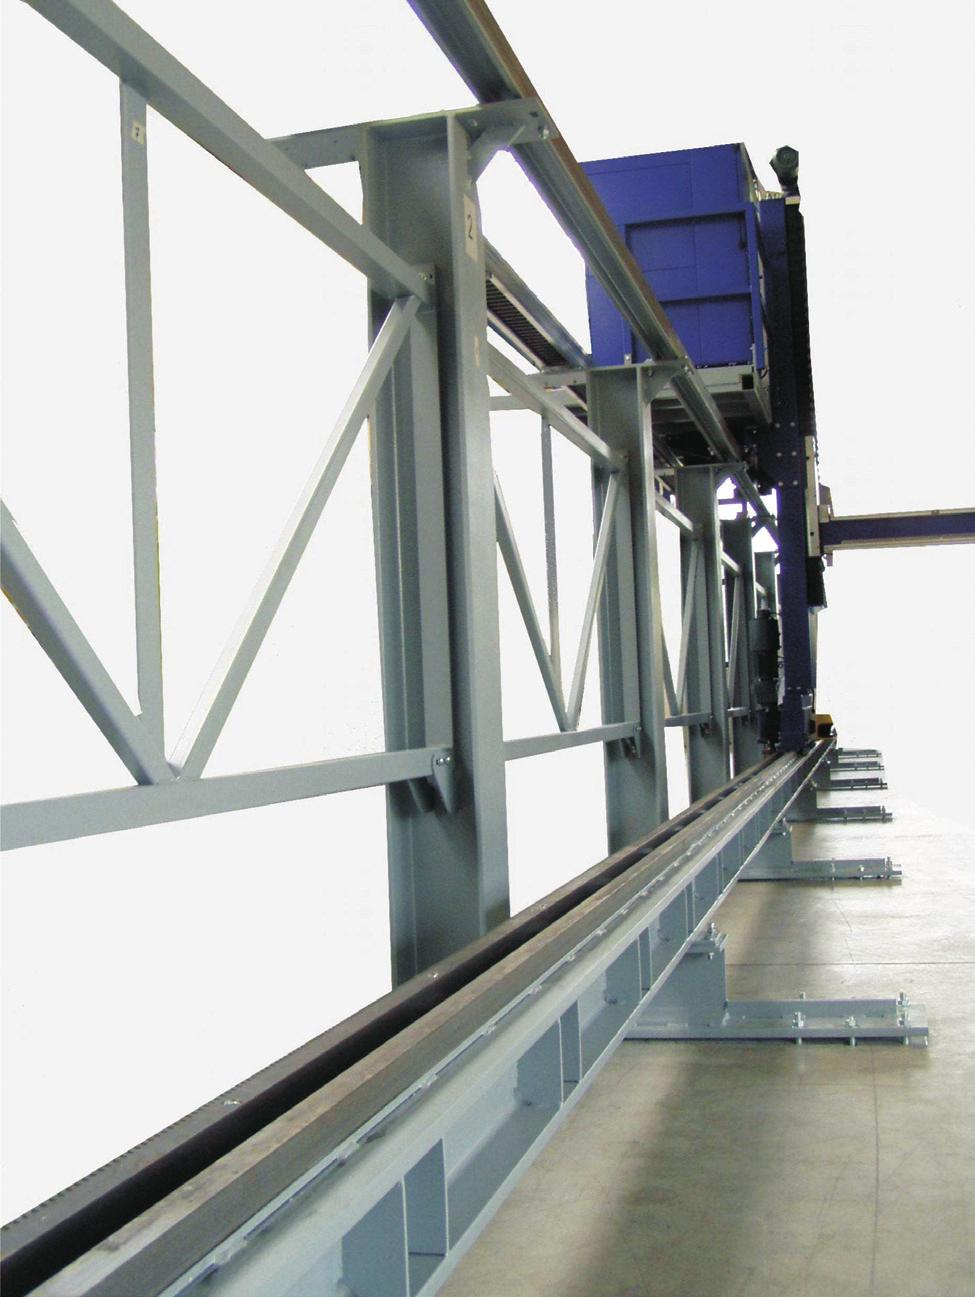 The machine framework is of solid steel construction designed for the mounting of guide rails and carriages The high stability of the guide rails is achieved